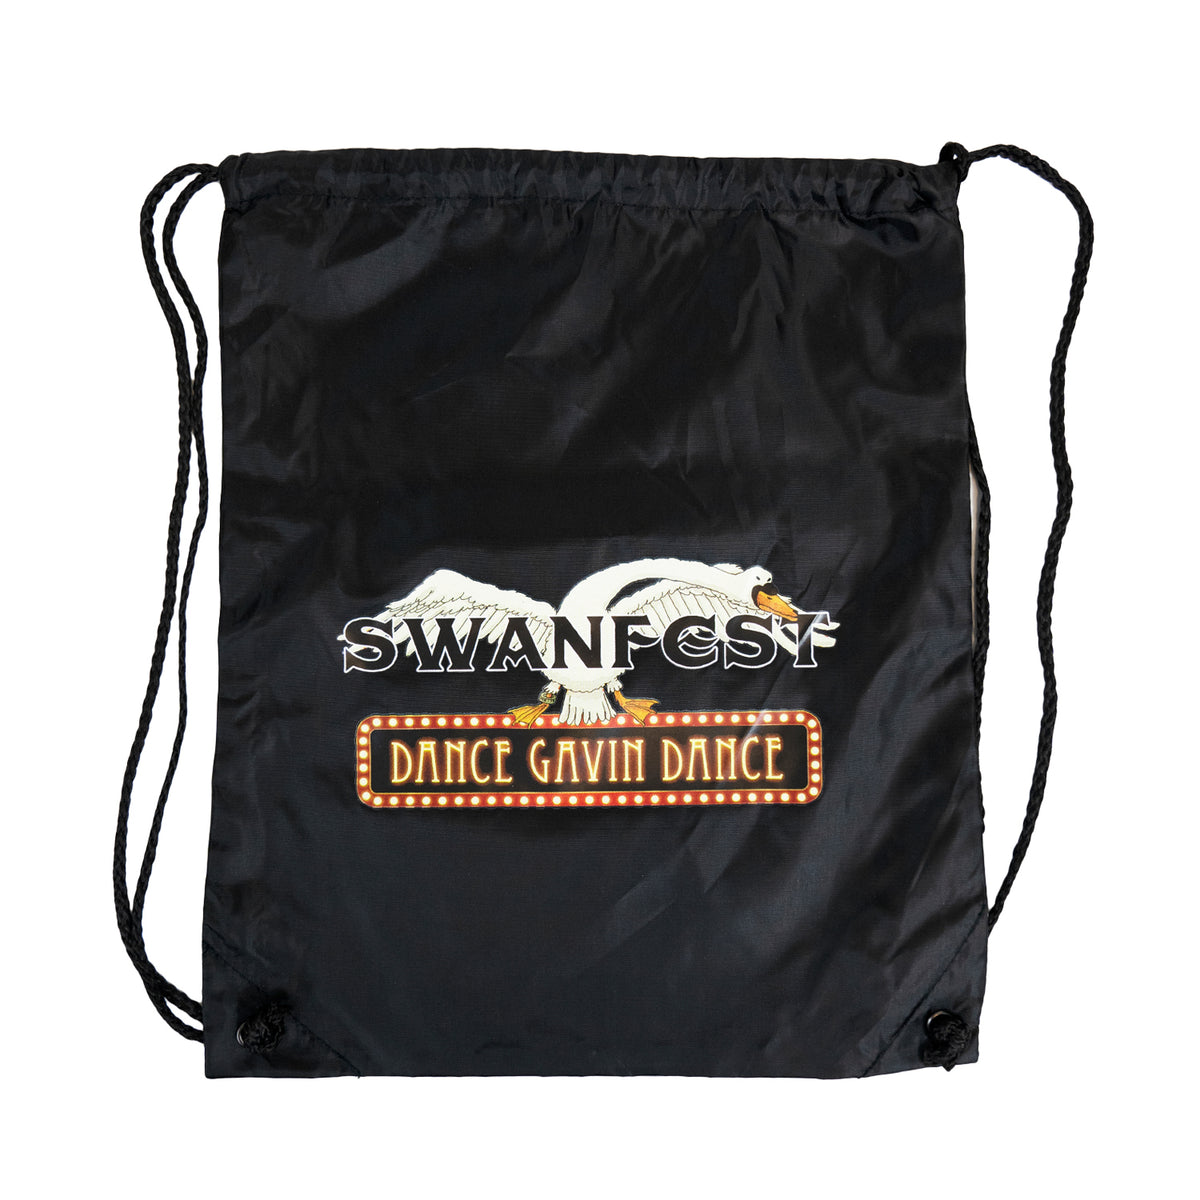 image of a black cinch bag laid flat on a white background. front of bag has a white swan with wings outstretched. it says swanfest over it and dance gavin dance below